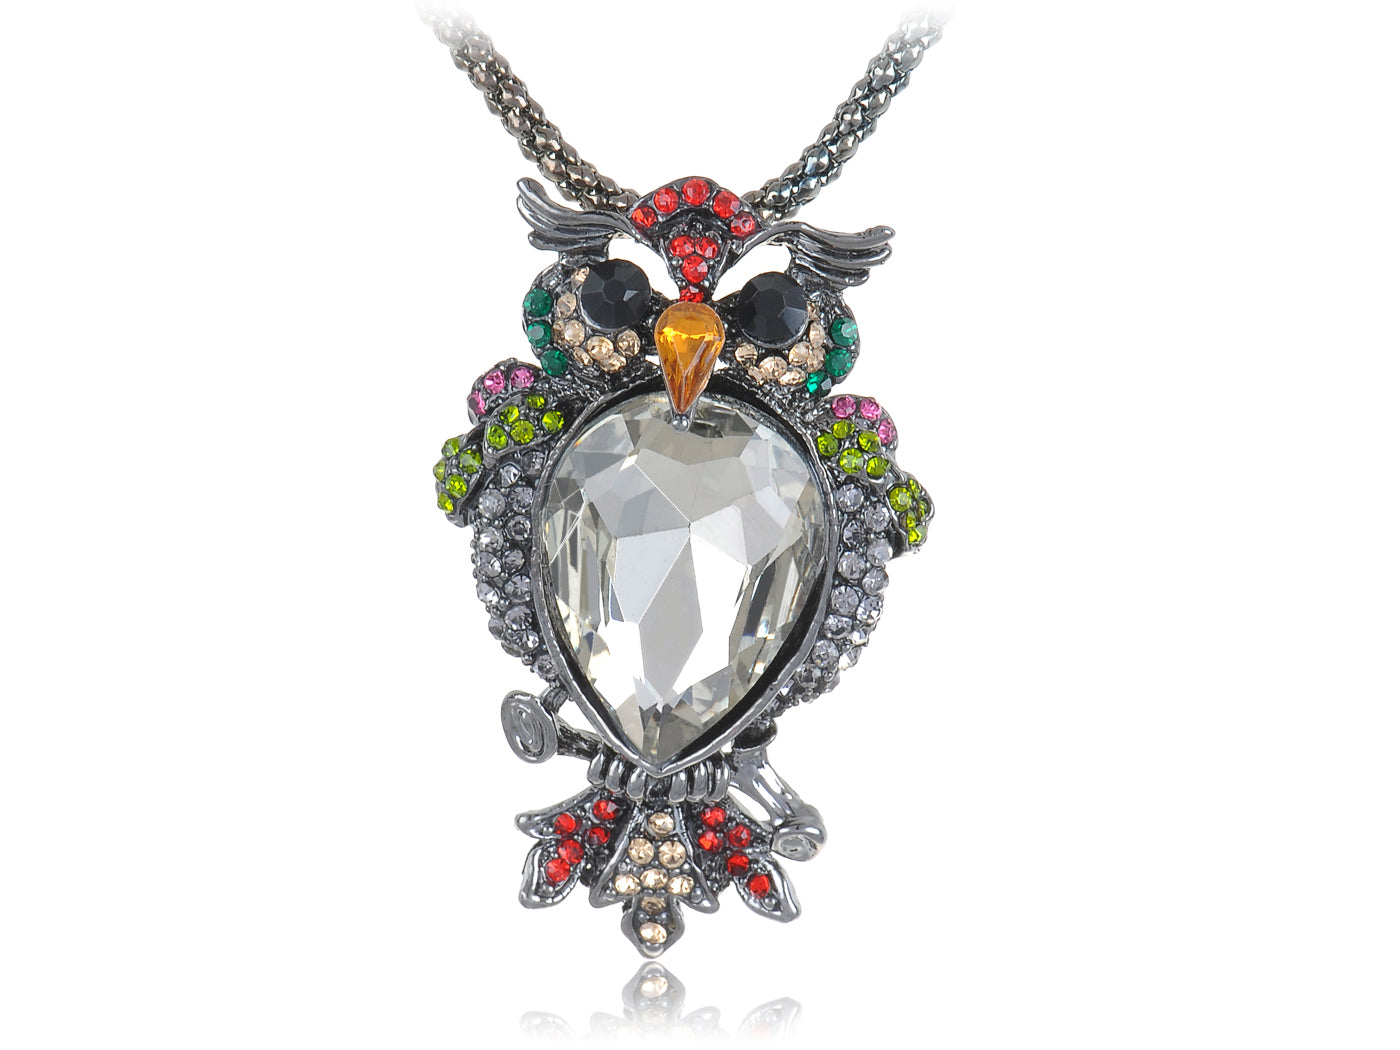 Puffed Chest Colorful Hooting Bird Owl Pendant Necklace